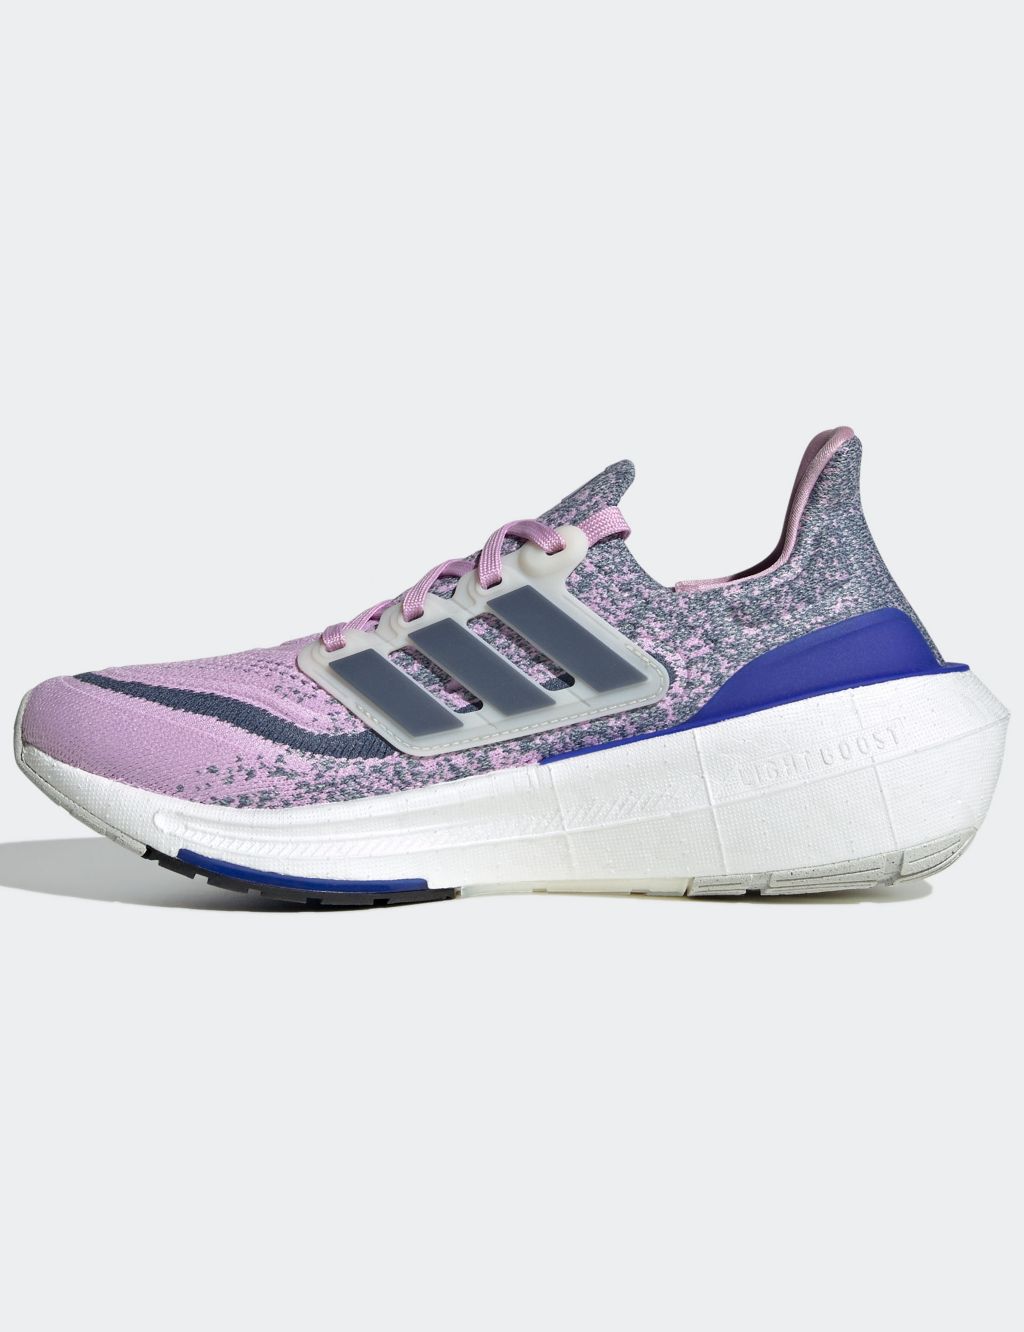 Ultraboost 23 Trainers image 3